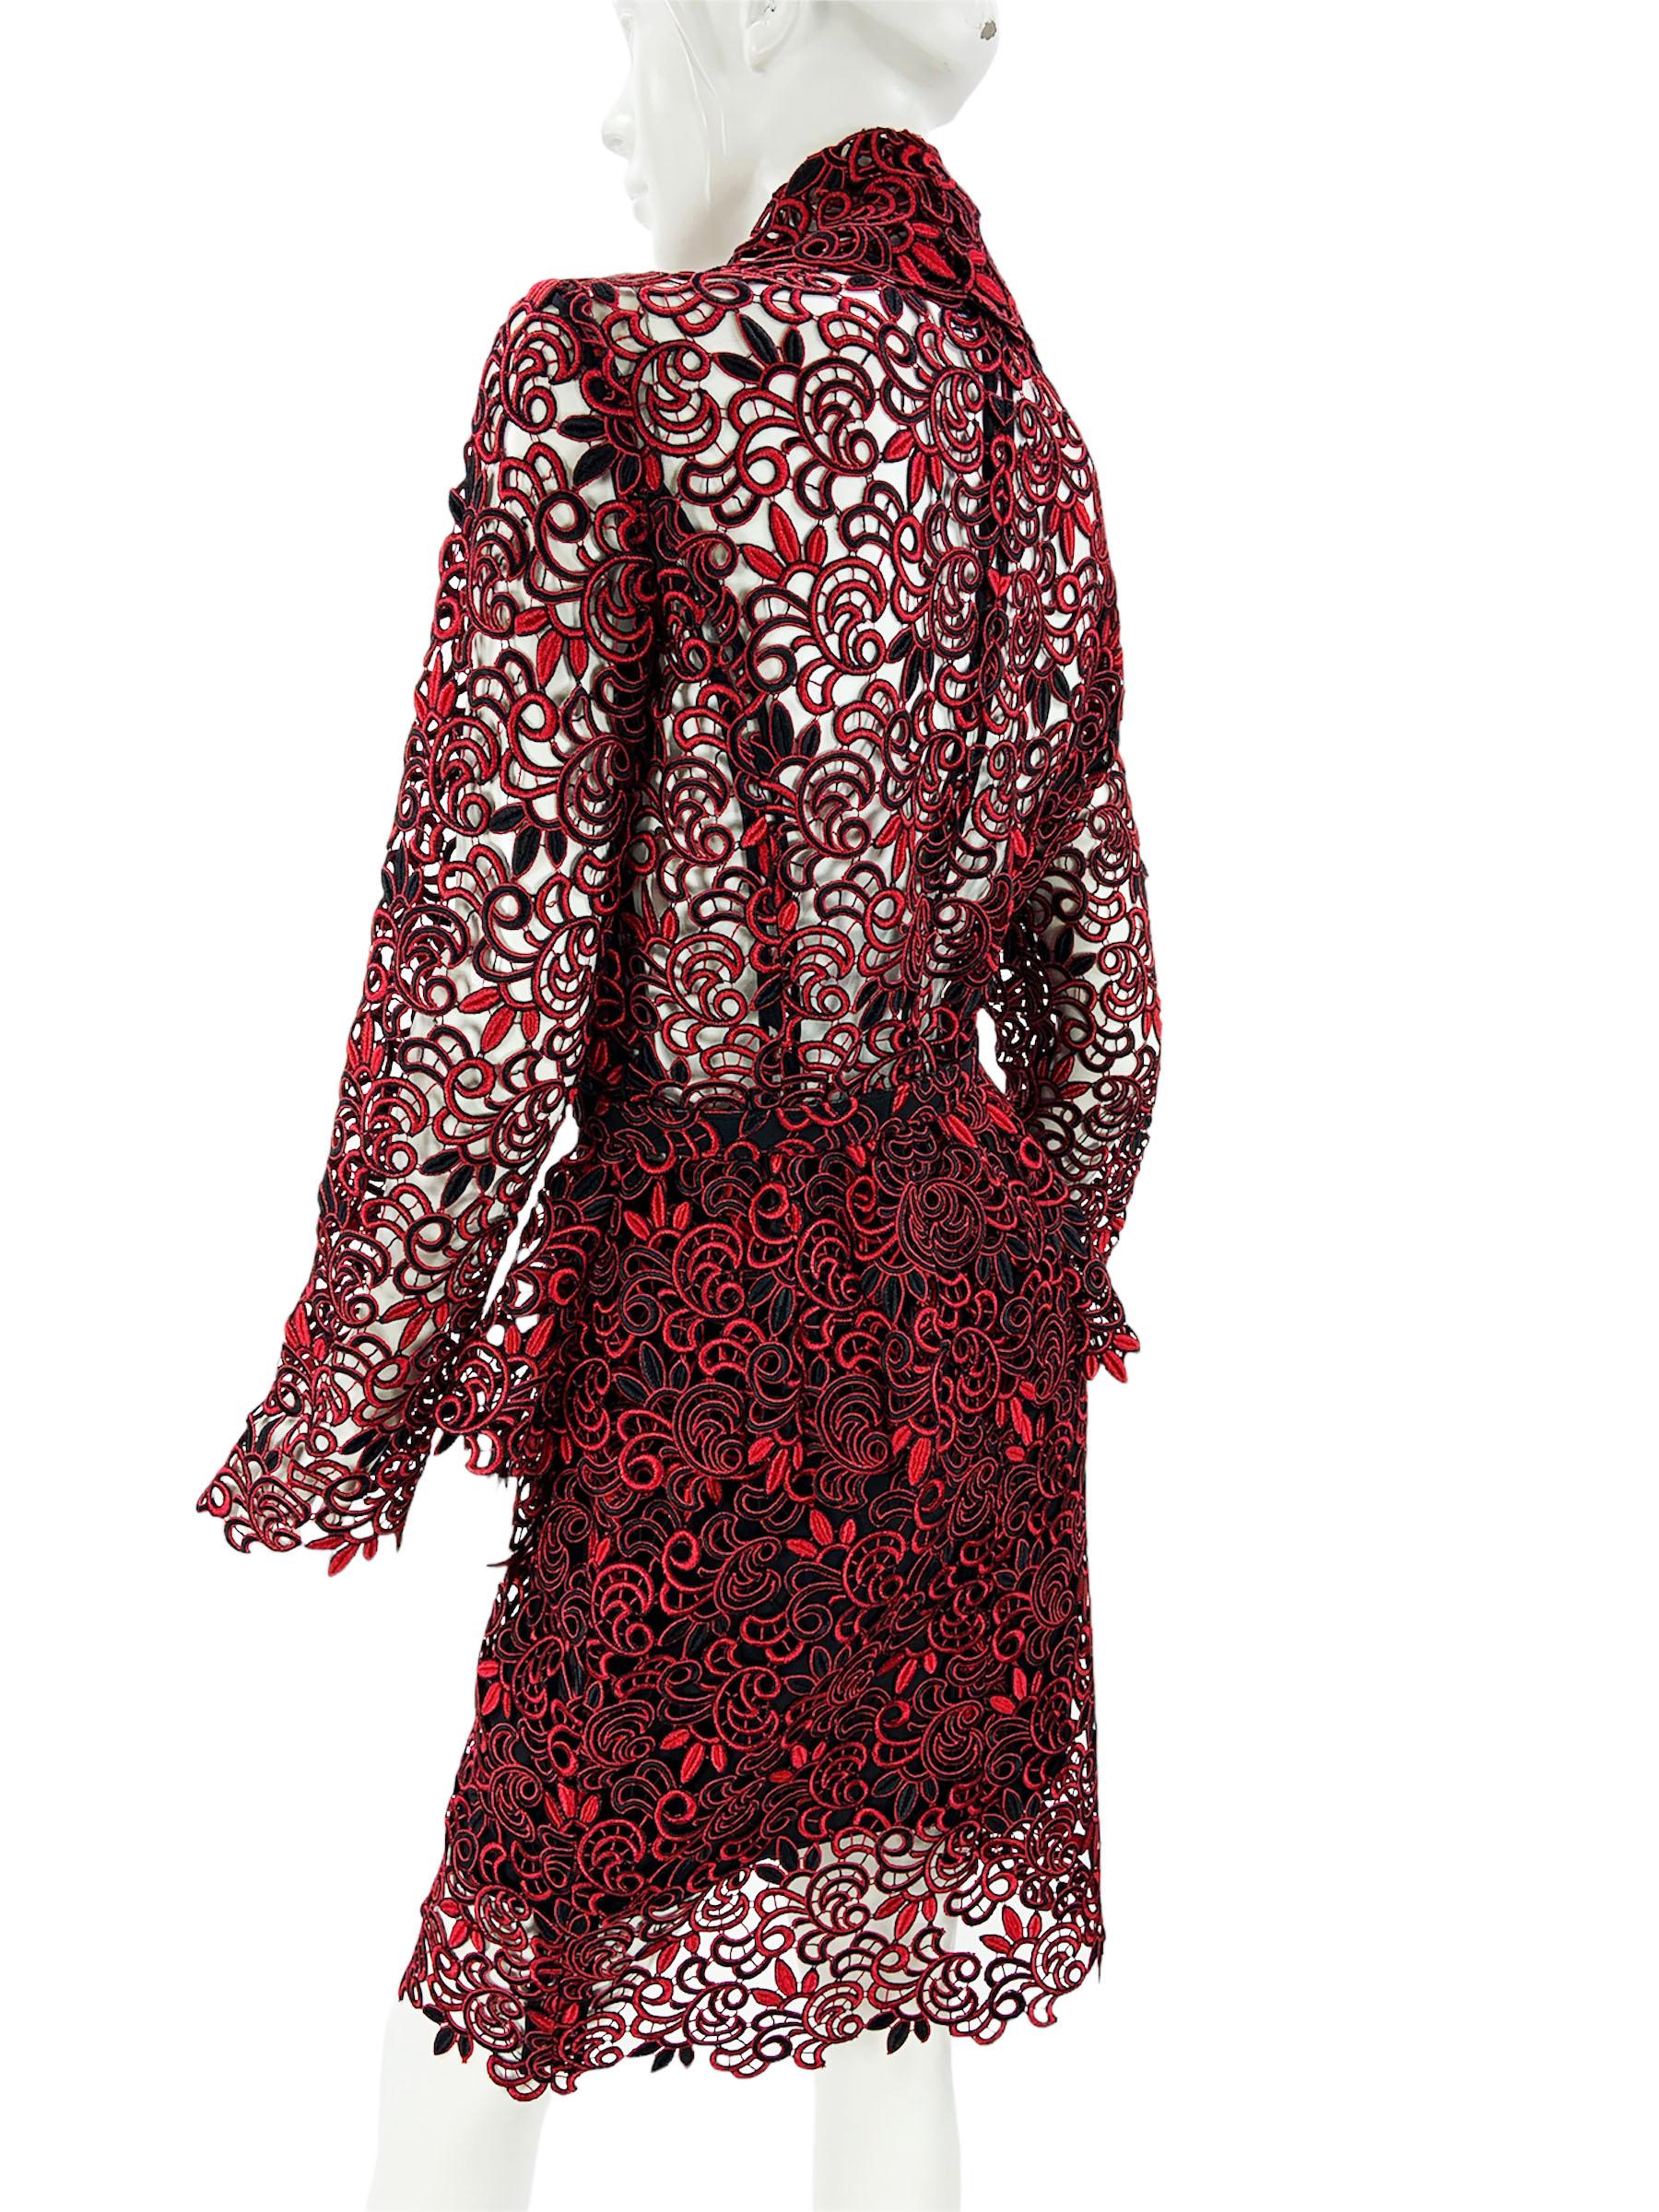 New Oscar de la Renta Runway F/W 2014 Lace Red Black Belted Skirt Suit US 6 In New Condition For Sale In Montgomery, TX